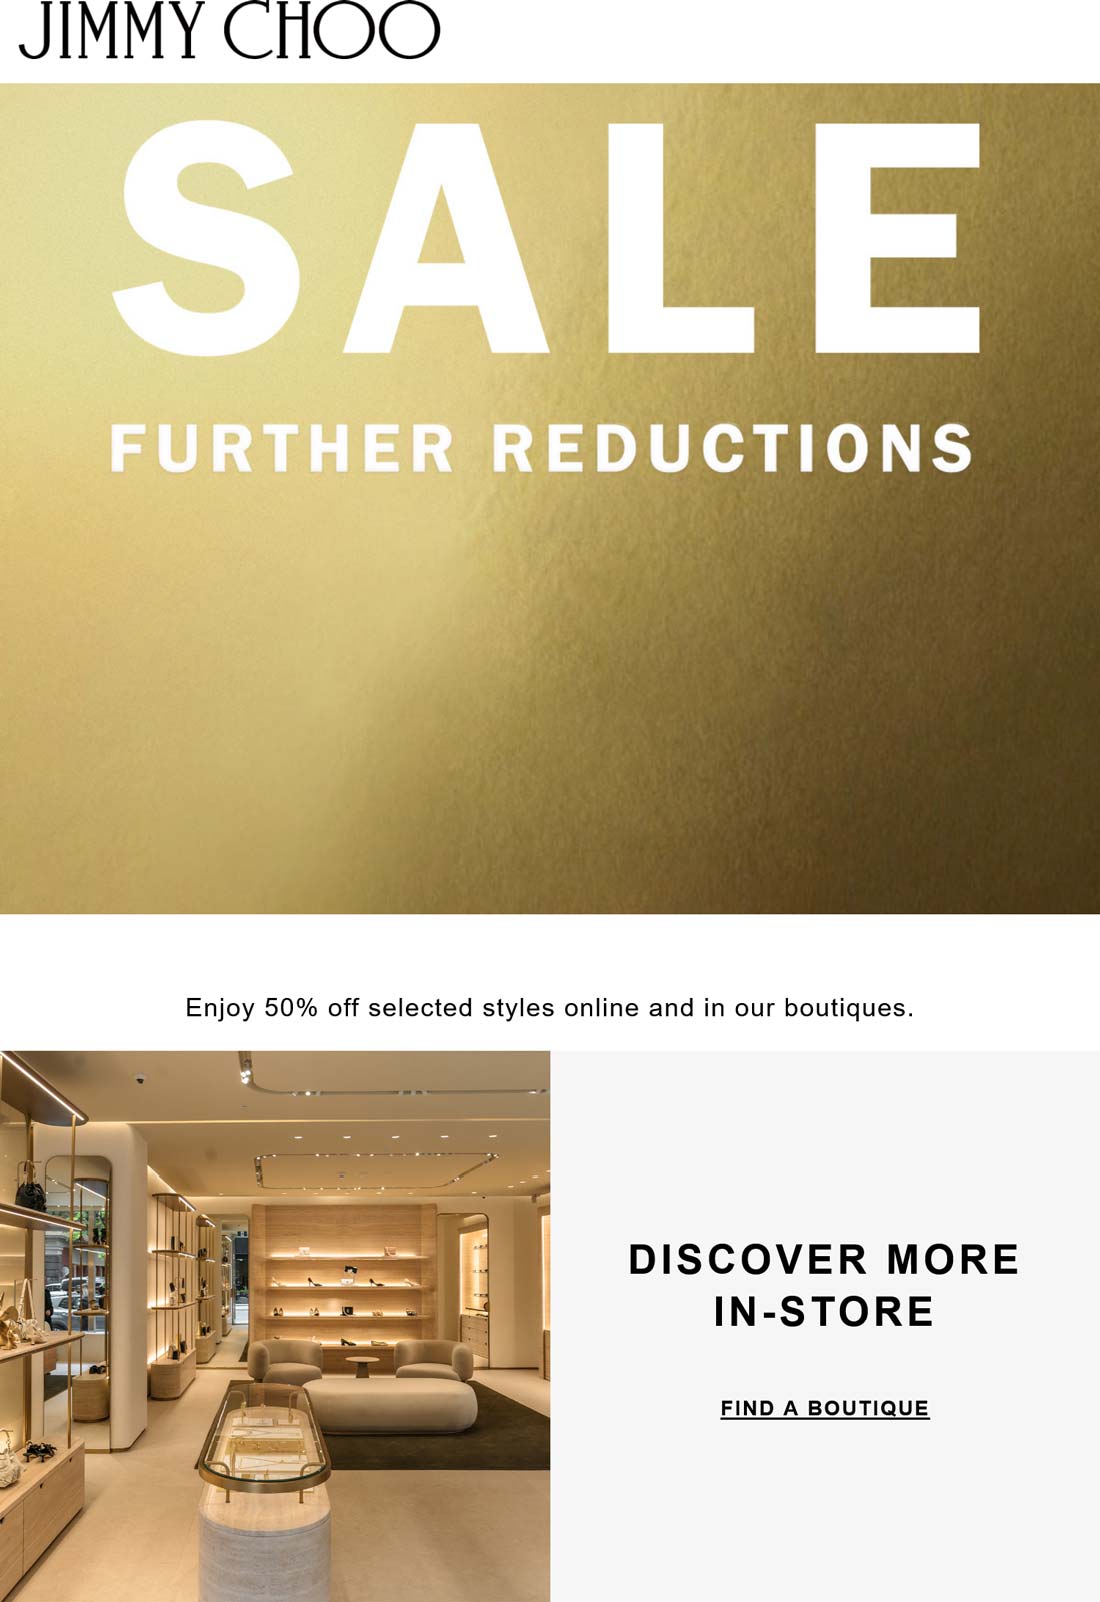 Jimmy Choo stores Coupon  Extra 50% off sale items at Jimmy Choo, ditto online #jimmychoo 